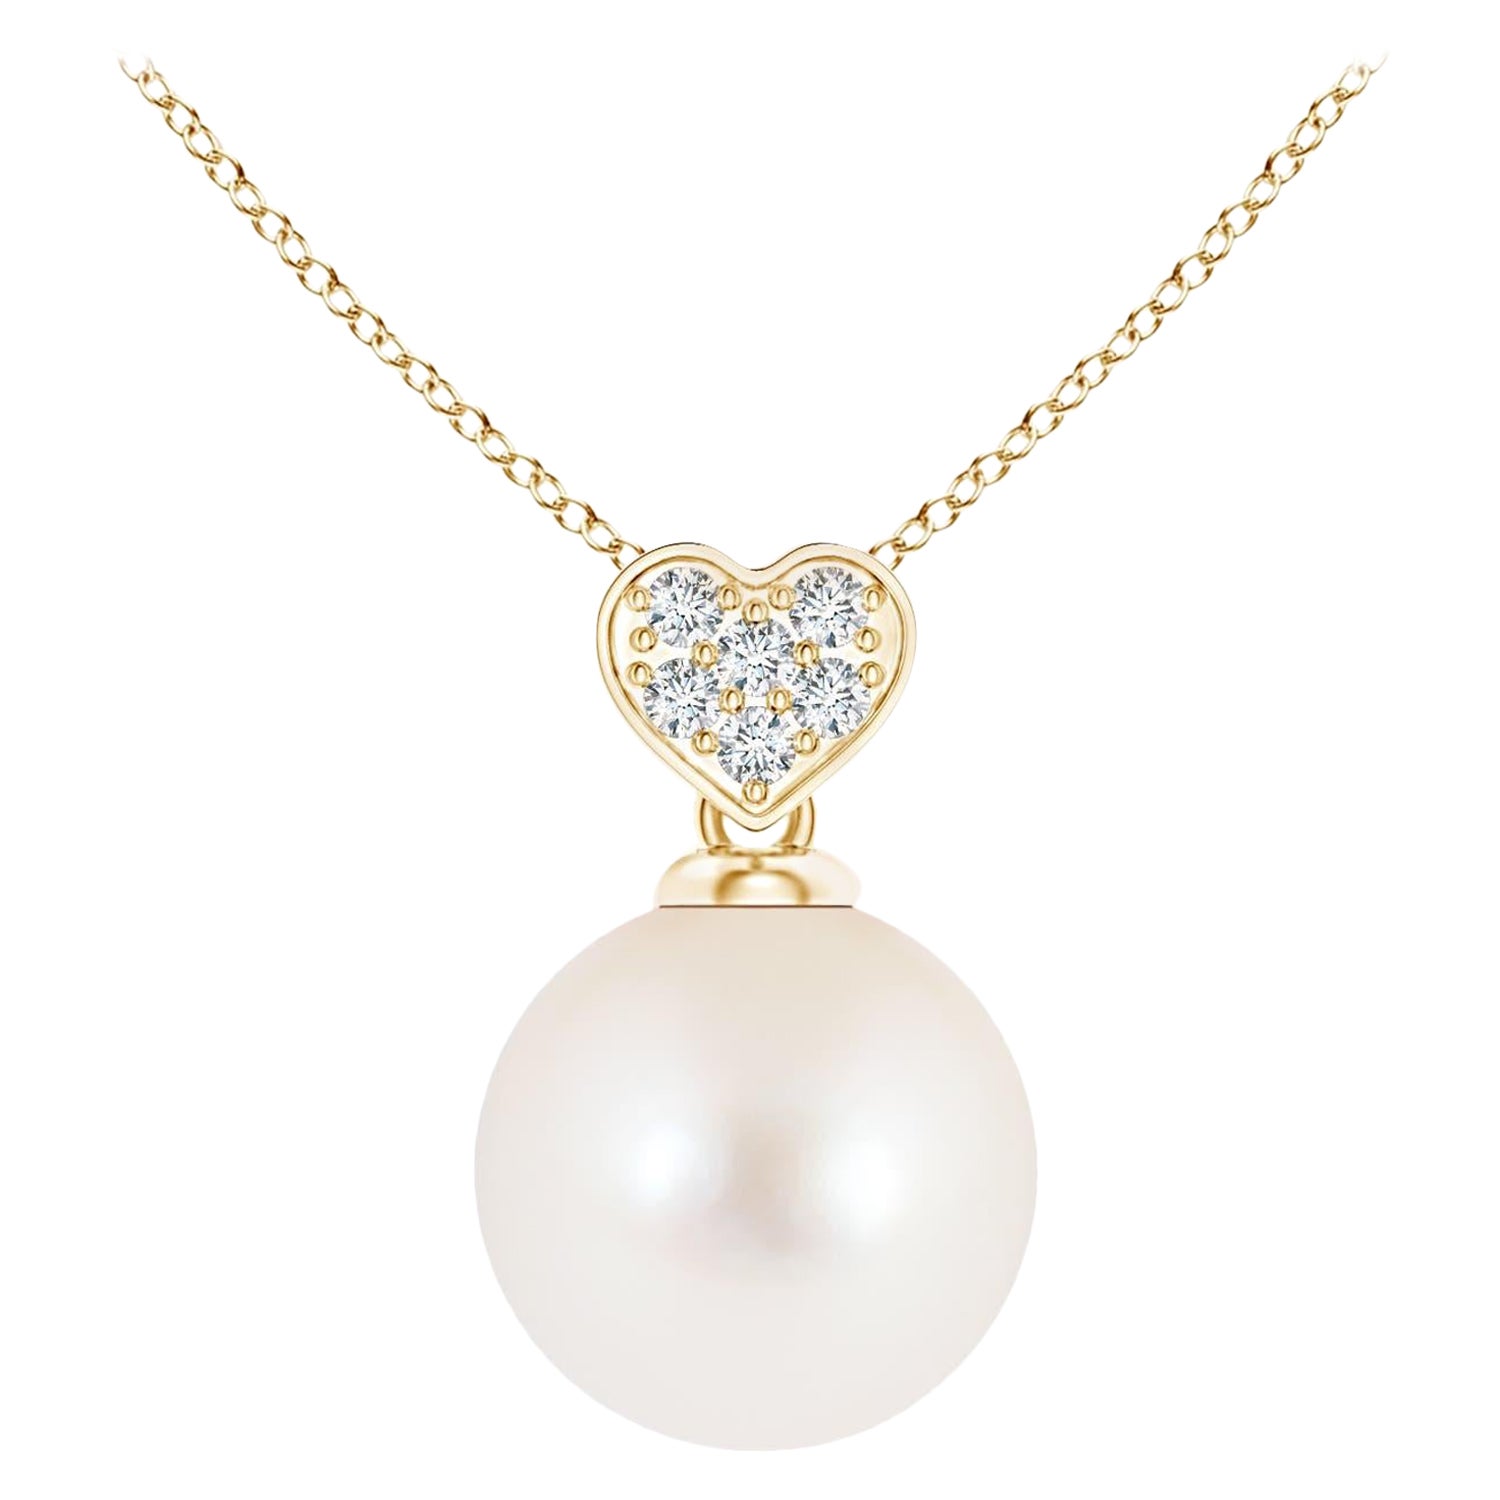 Freshwater Cultured Pearl Pendant with Heart-Shaped Bale in 14K Yellow Gold